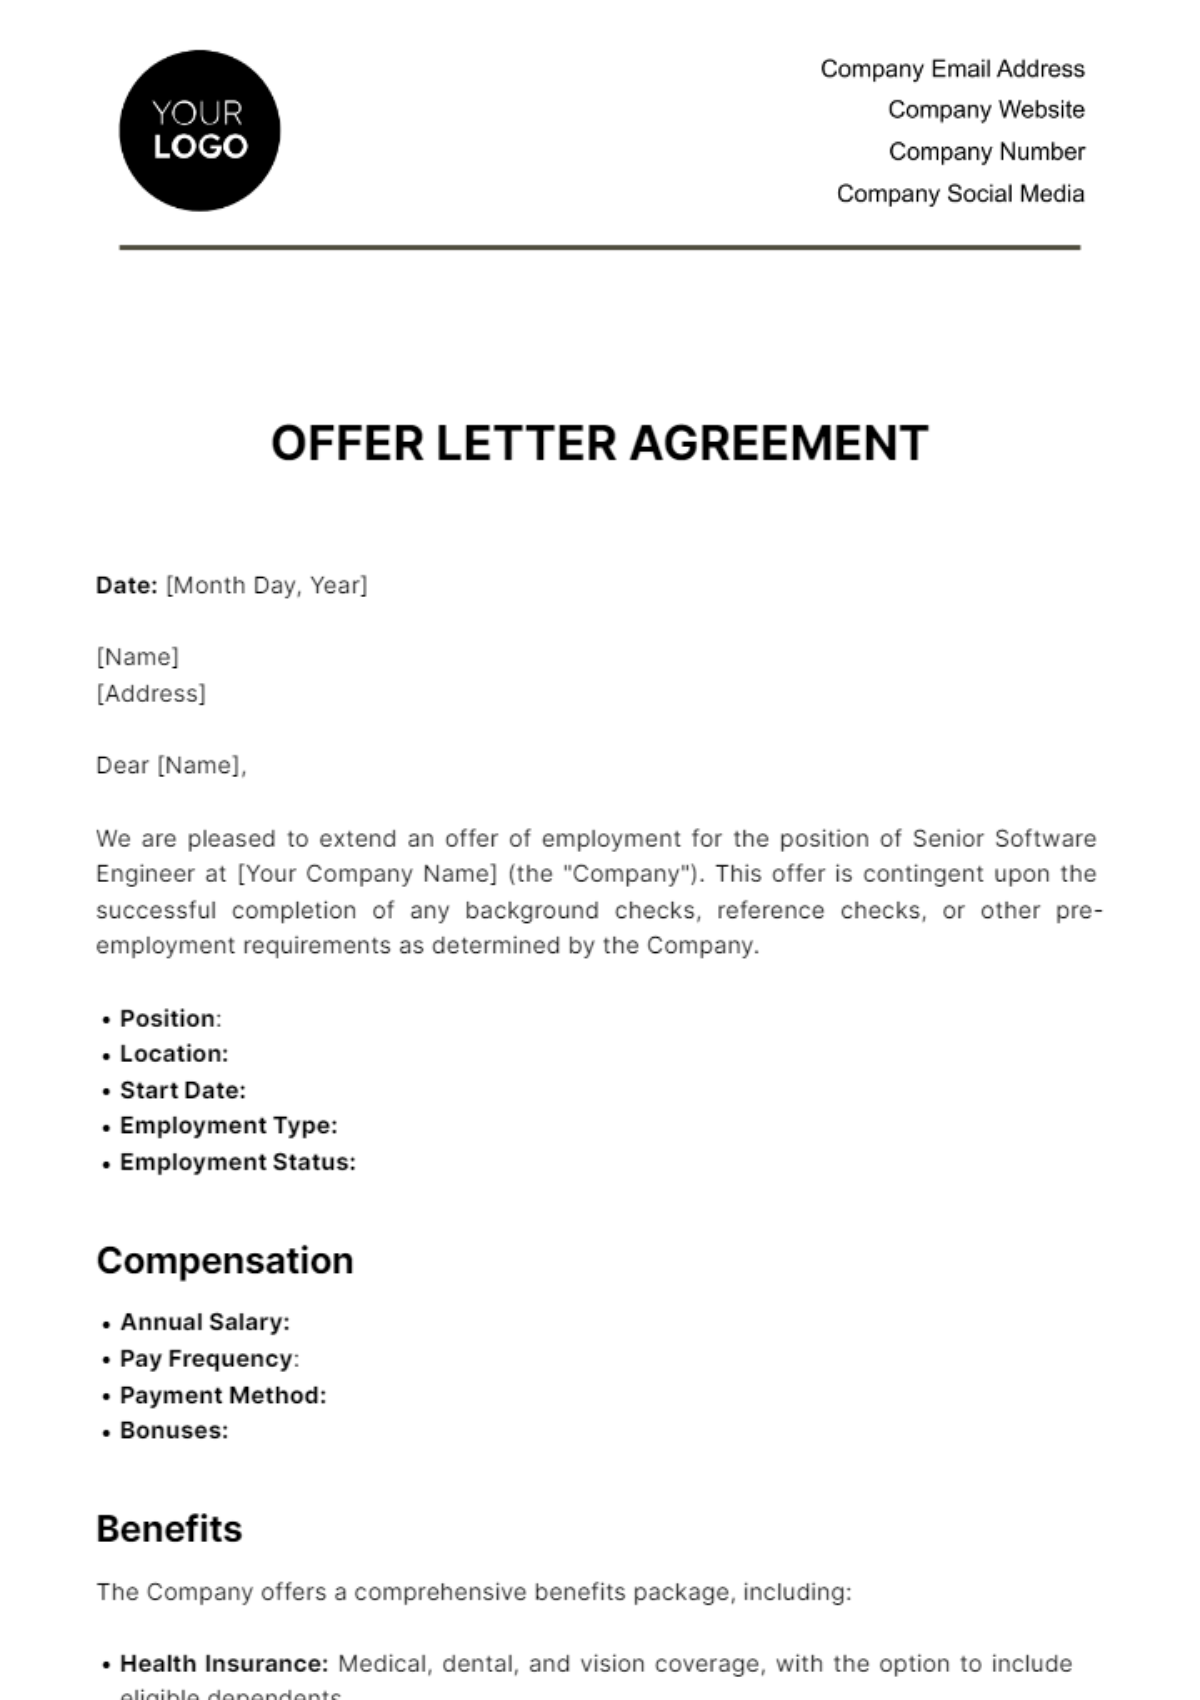 Free Offer Letter Agreement HR Template